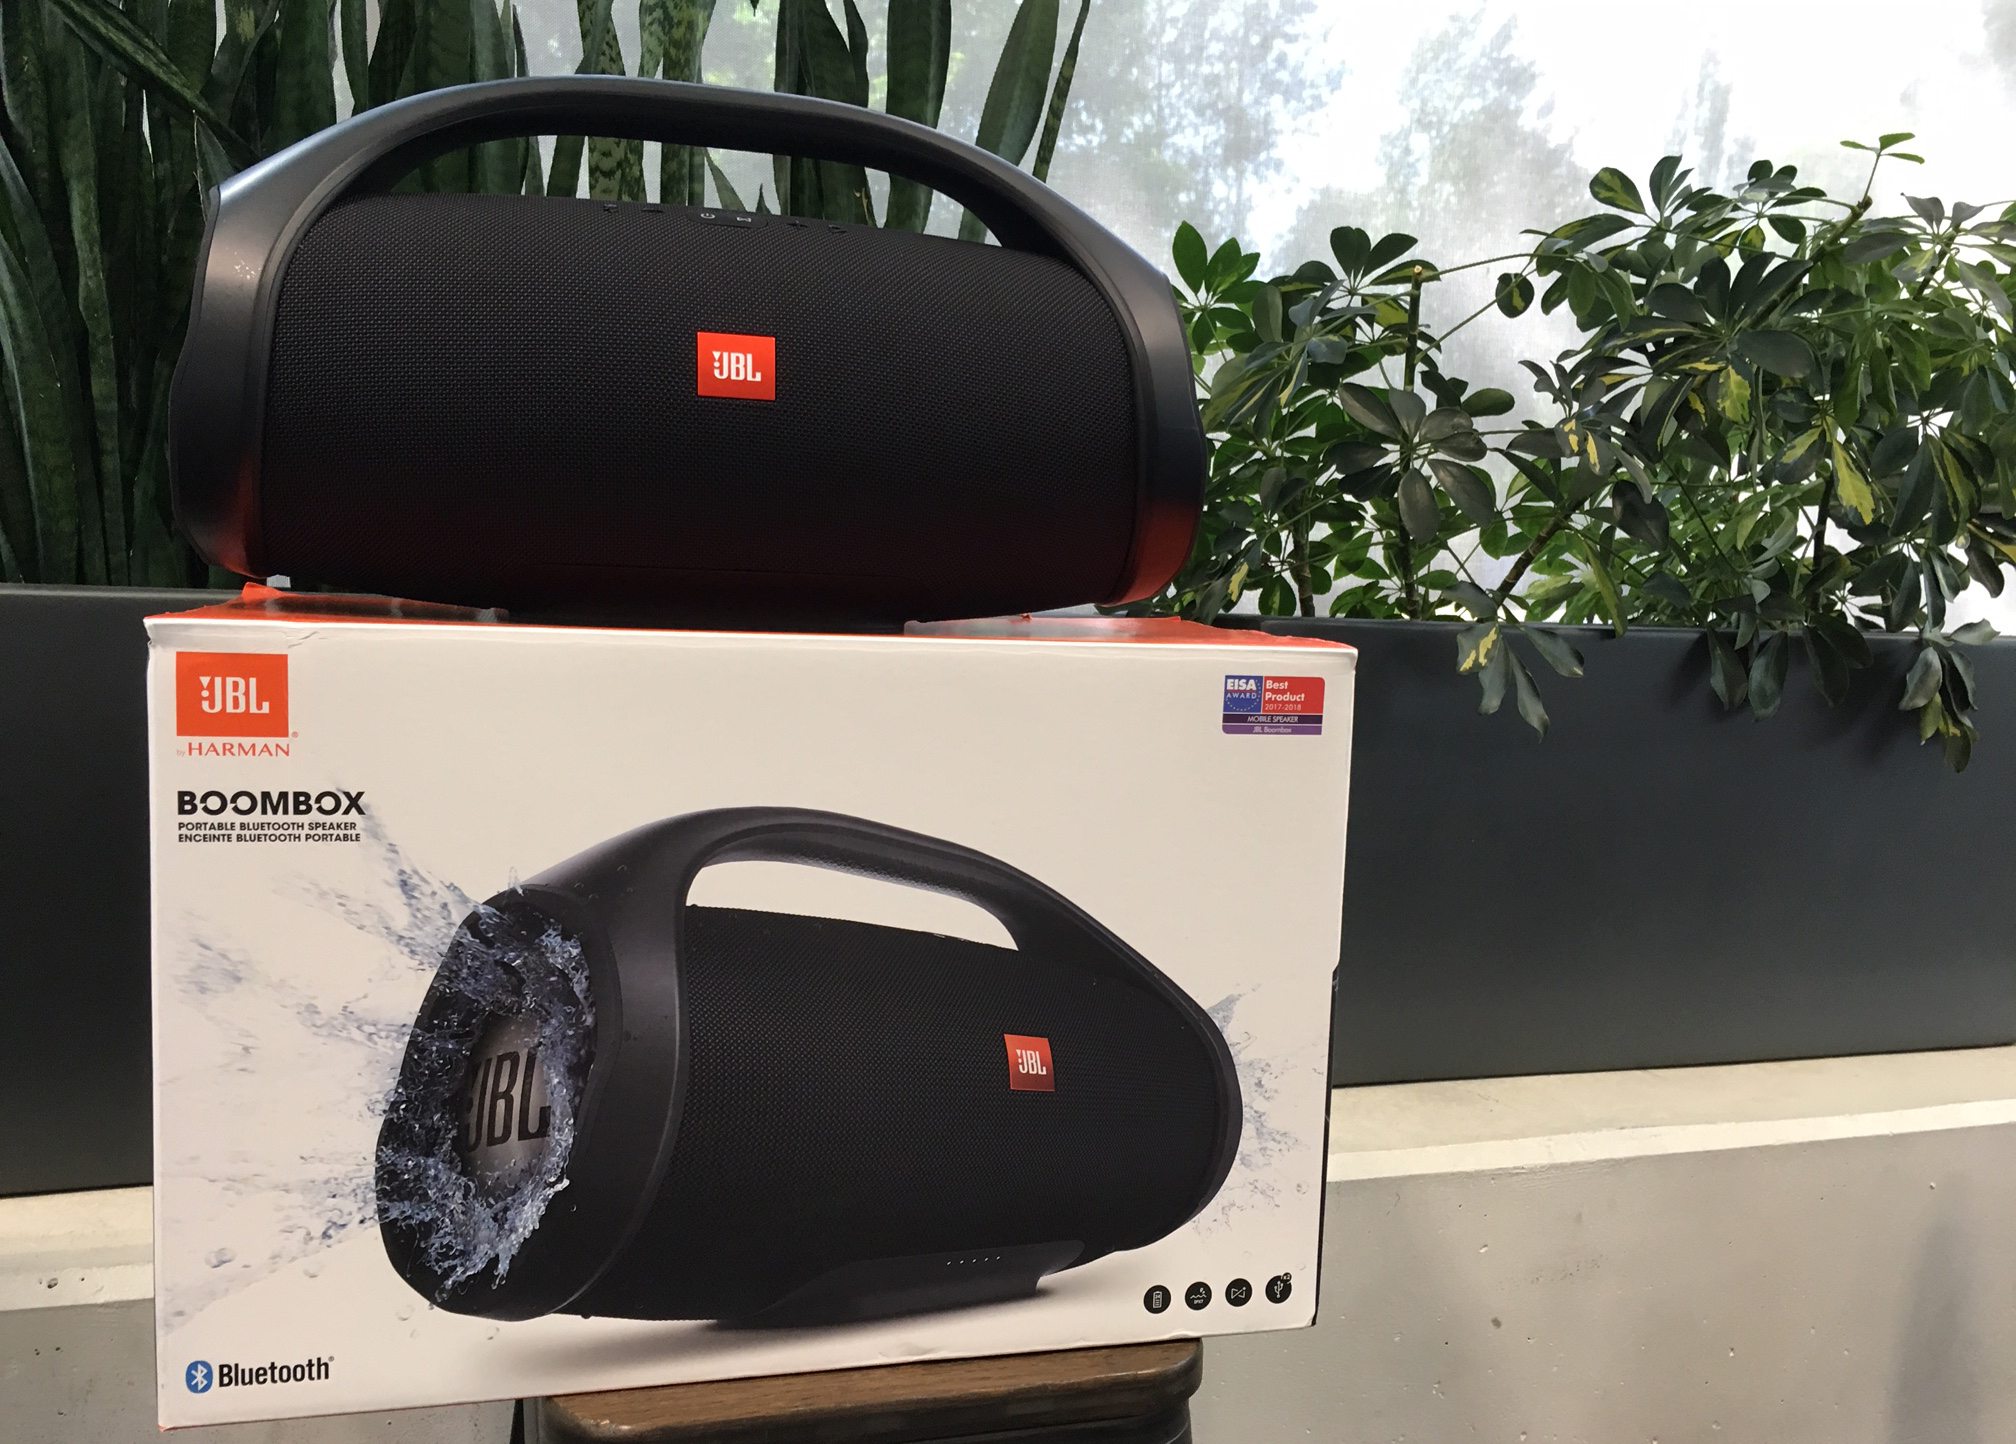 JBL Boombox contest prize